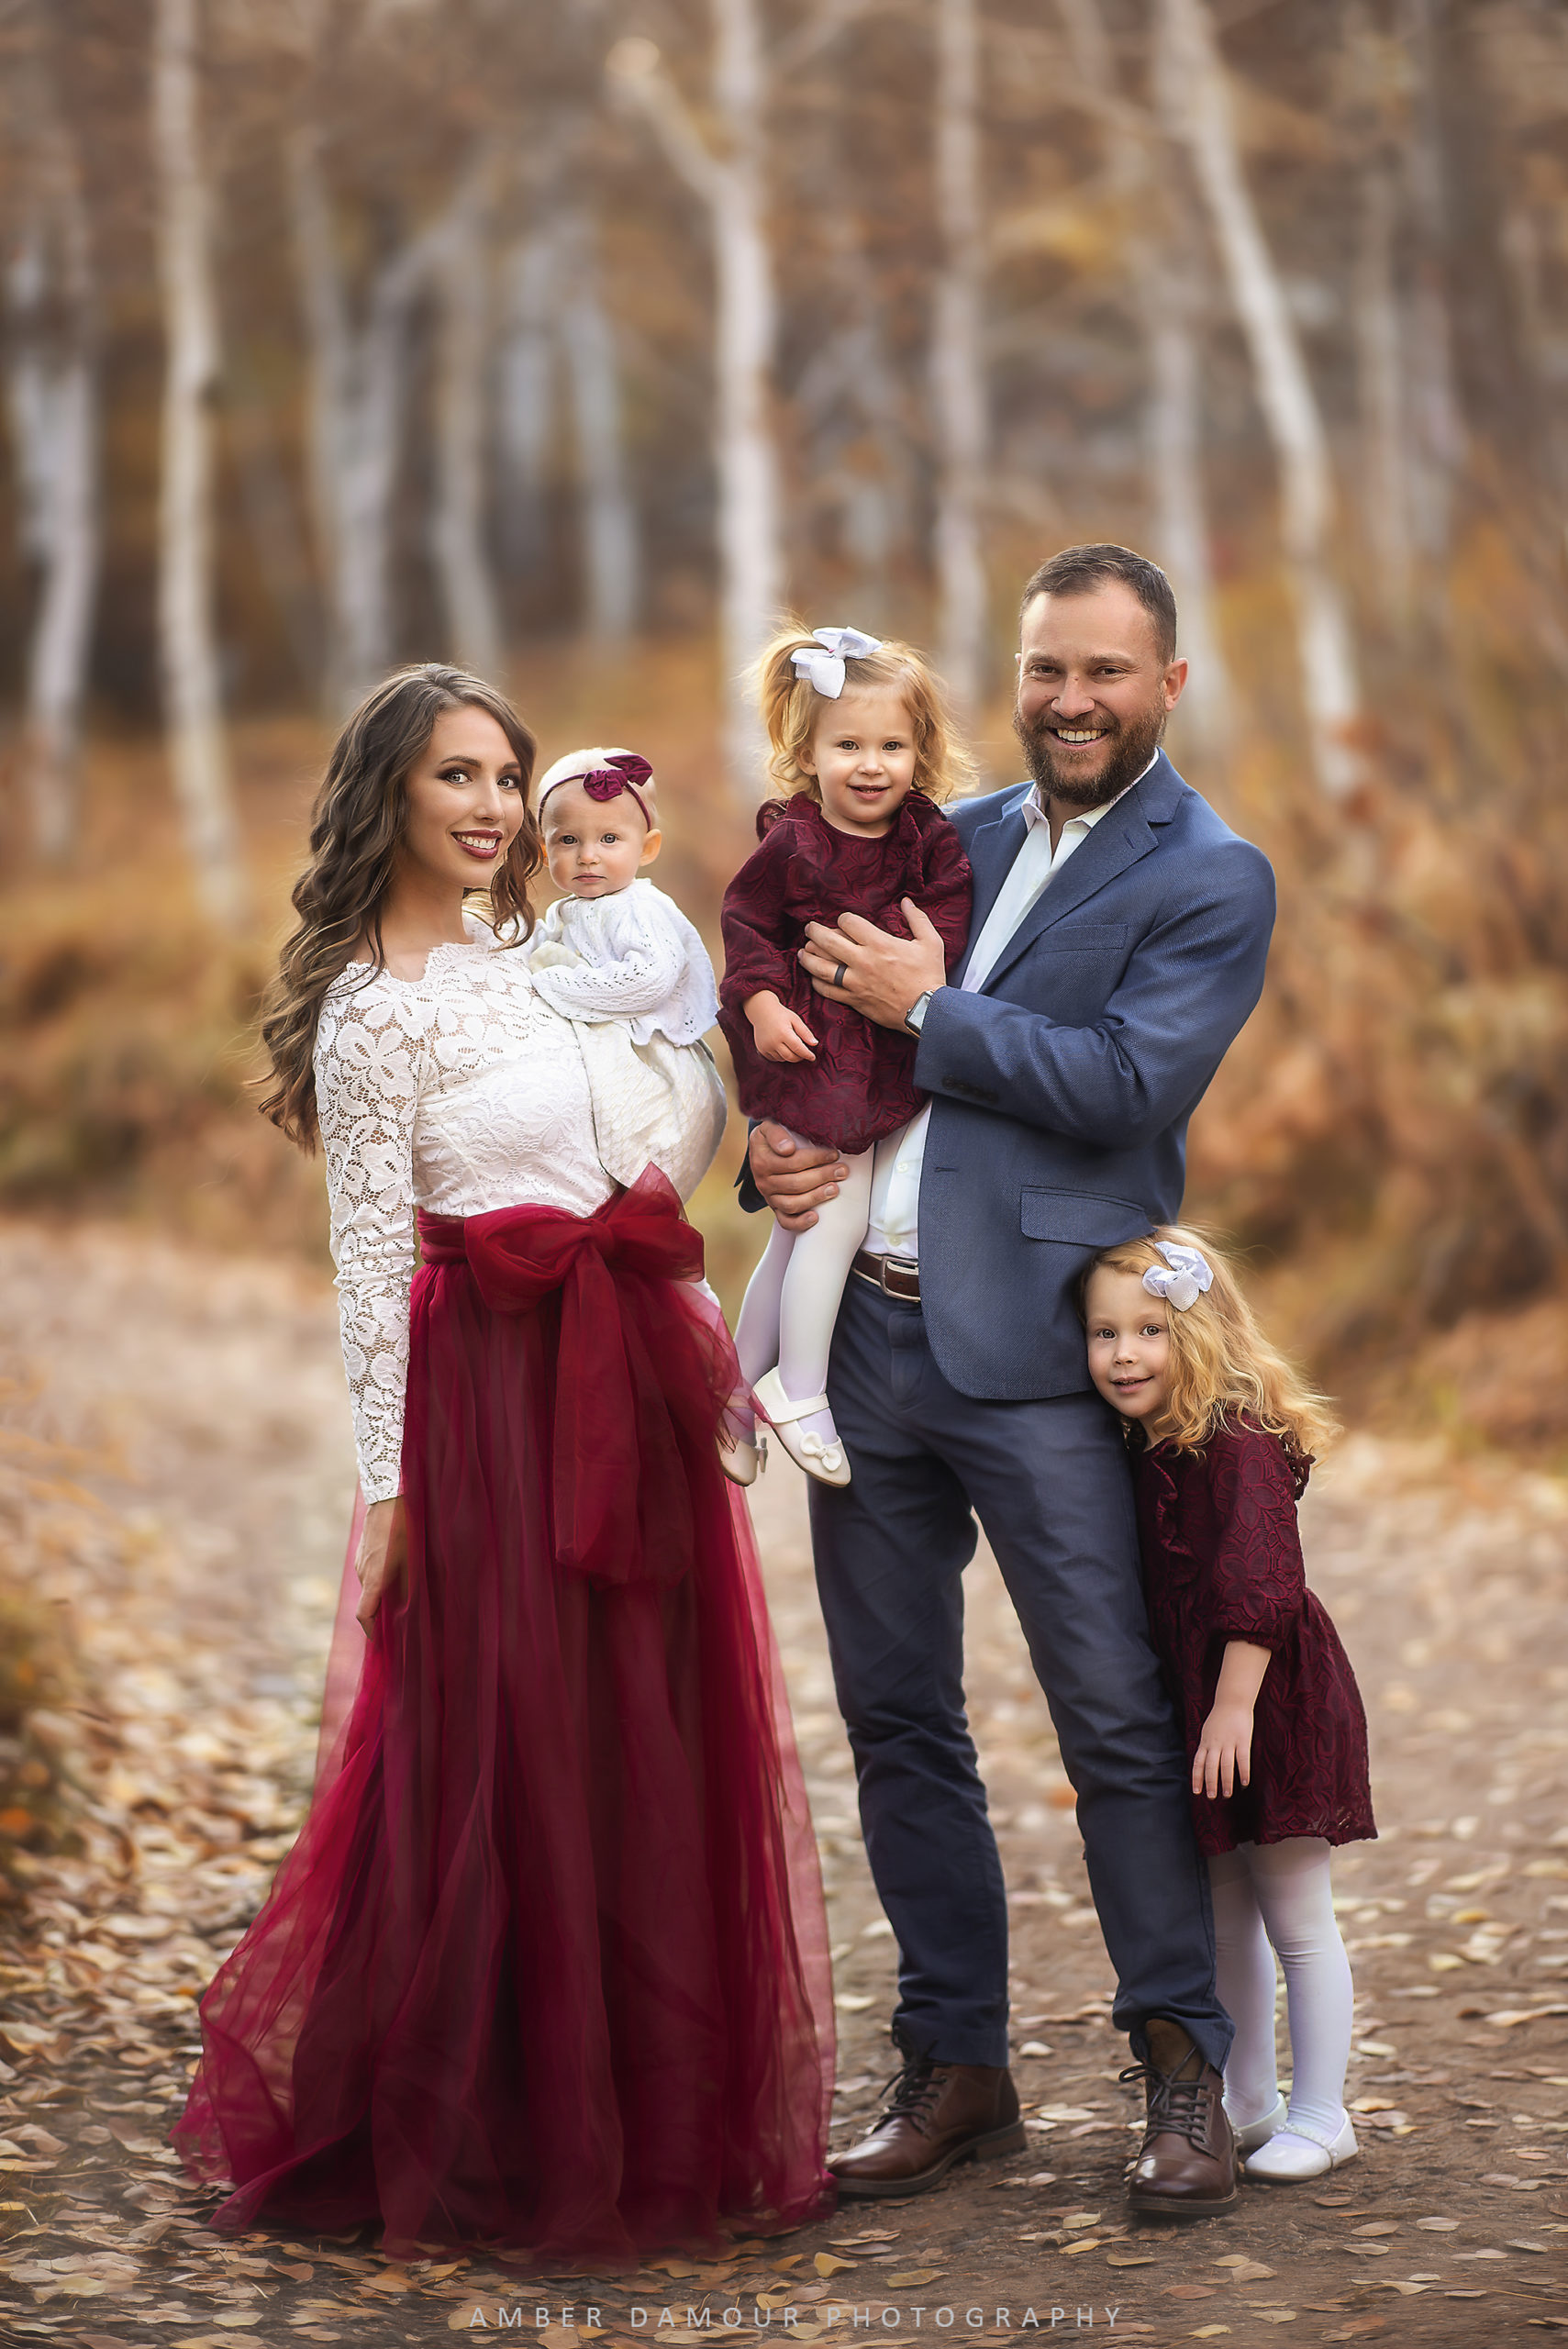 Beautiful fine art family portrait photography in nature in the fall in Colorado